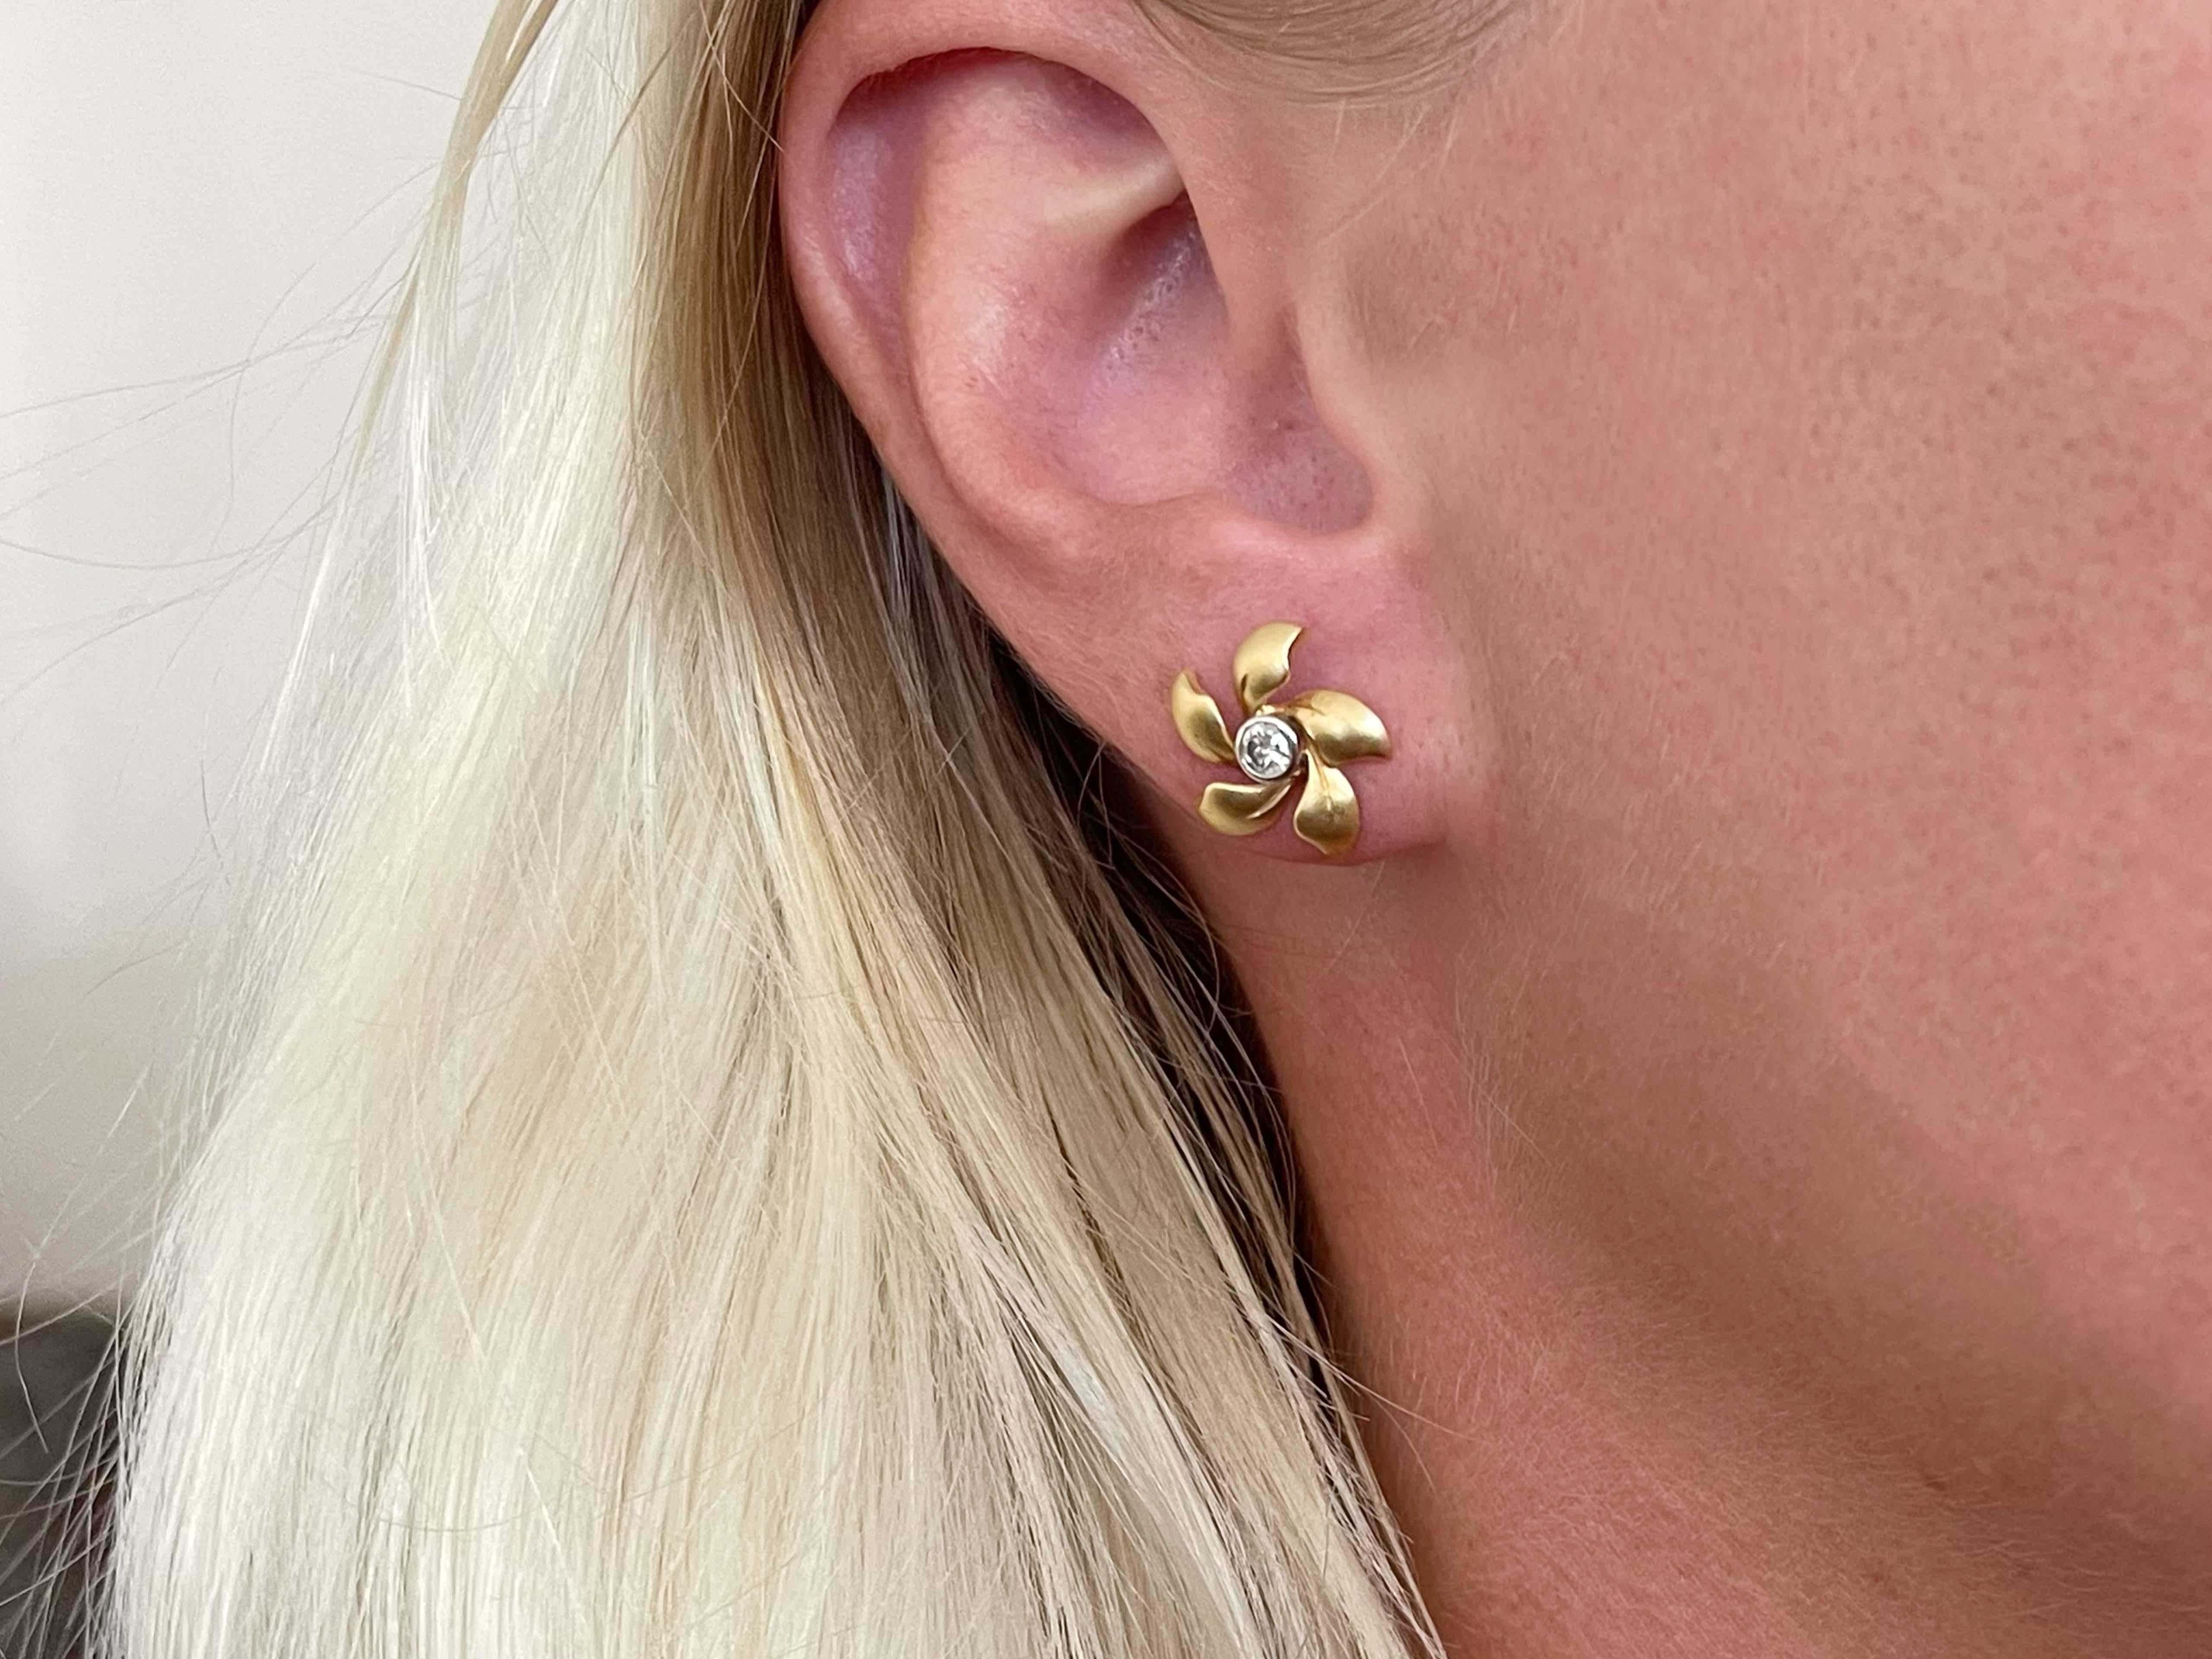 Earrings Specifications:

Metal: 14k Yellow Gold

​Total Weight: 2.4 Grams

Diamonds: 2

Setting: Bezel

Diamond Color: J-K

Diamond Clarity: I1

Diamond Carat Weight: 0.20 carats

Stamped: 